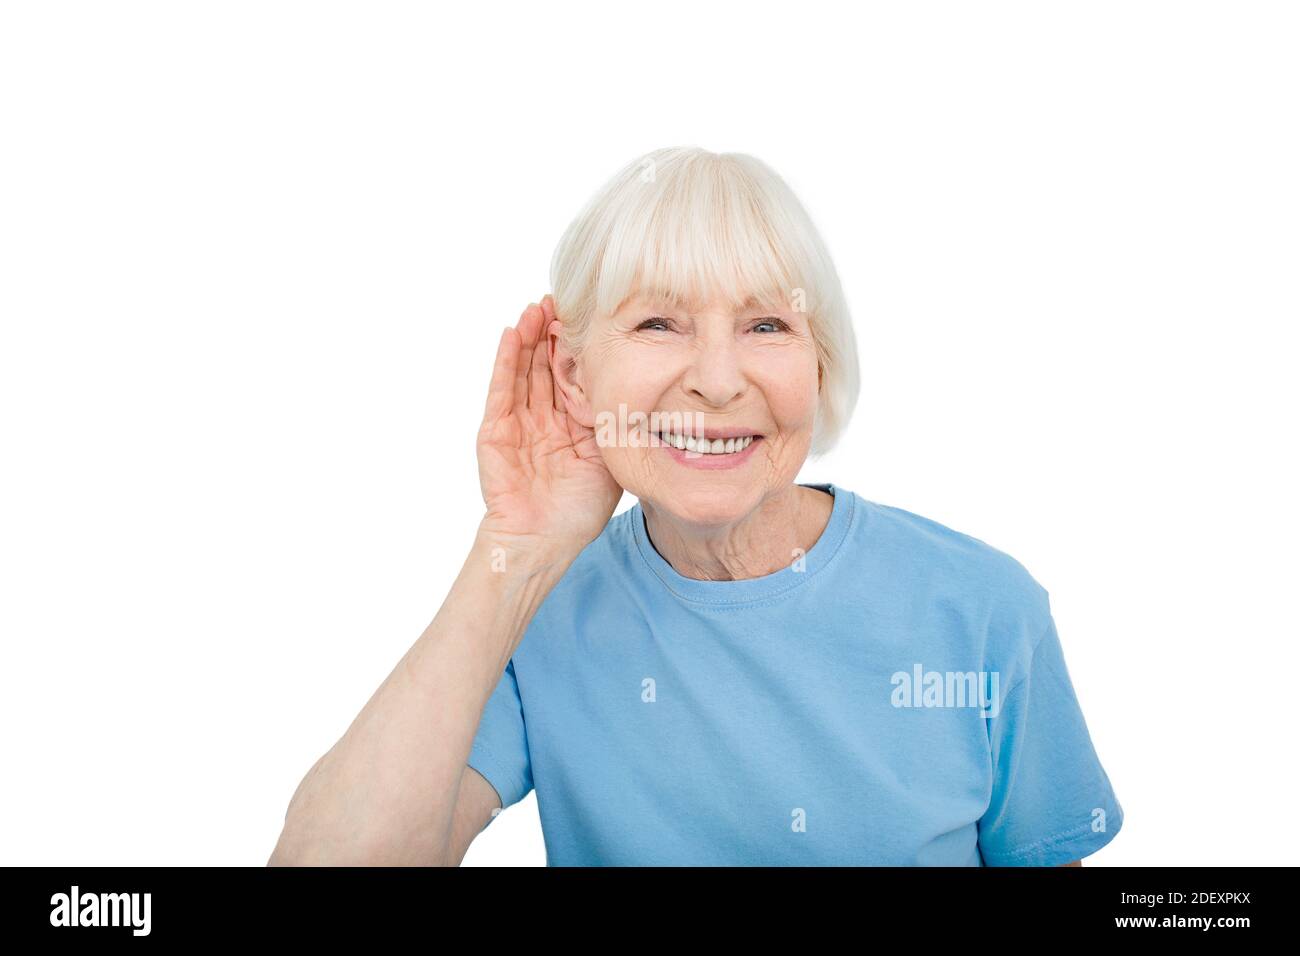 Deafness concept. Smiling elderly woman with a hand over ear listening sounds and voices, isolated on white Stock Photo